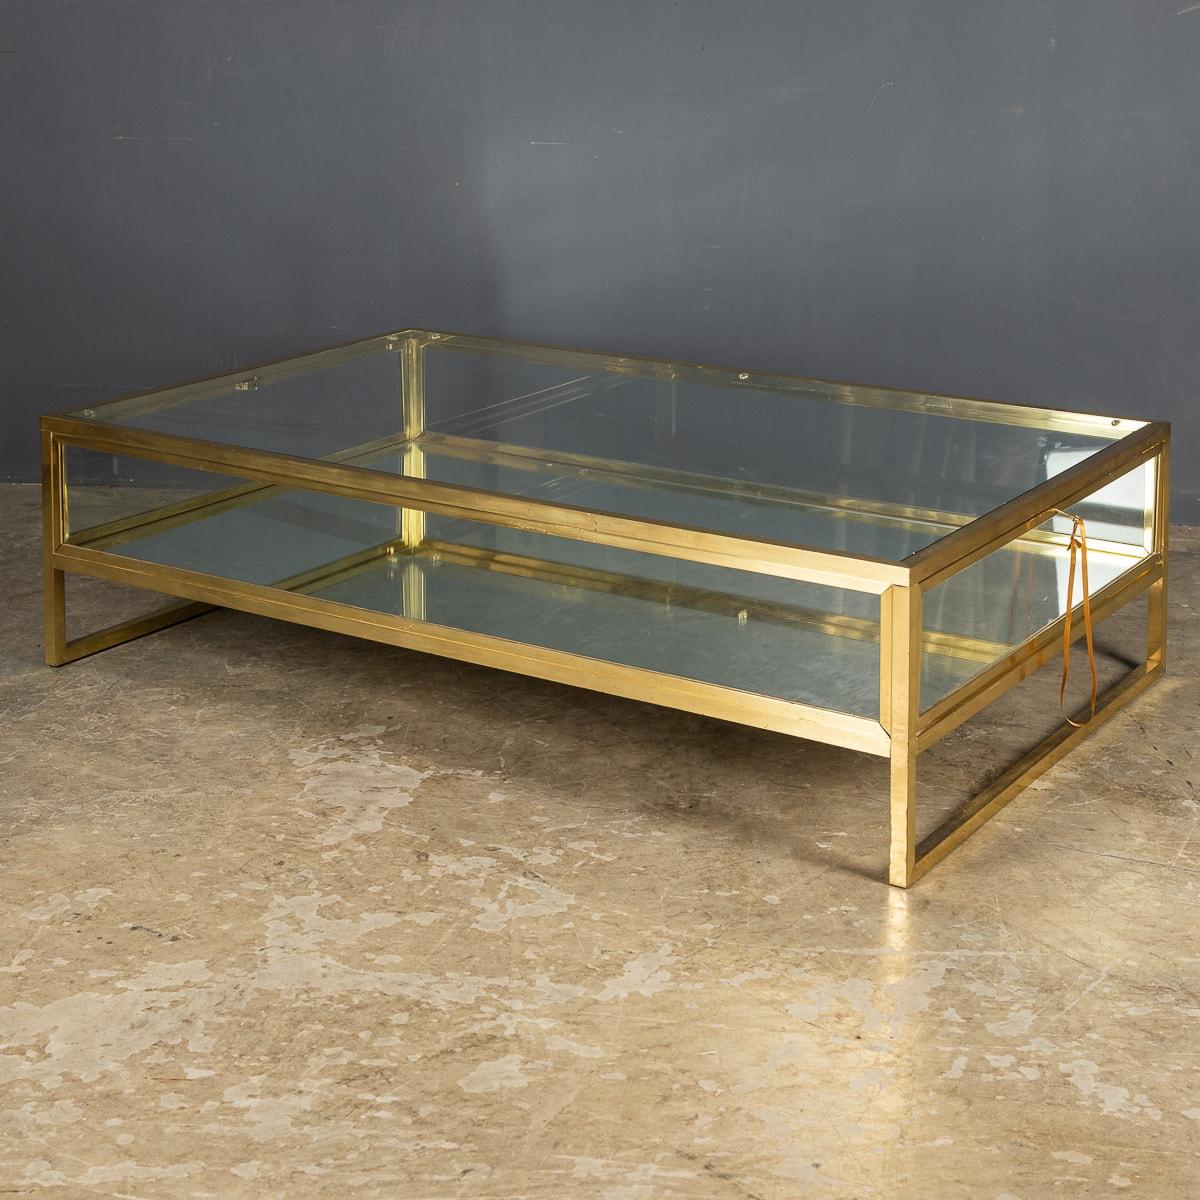 A French vitrine coffee table made by the design house Maison Jansen with gliding glass top. Made in brass with white metal detail and original bevelled glass and mirrored base.

CONDITION
In Great Condition - wear consistent with